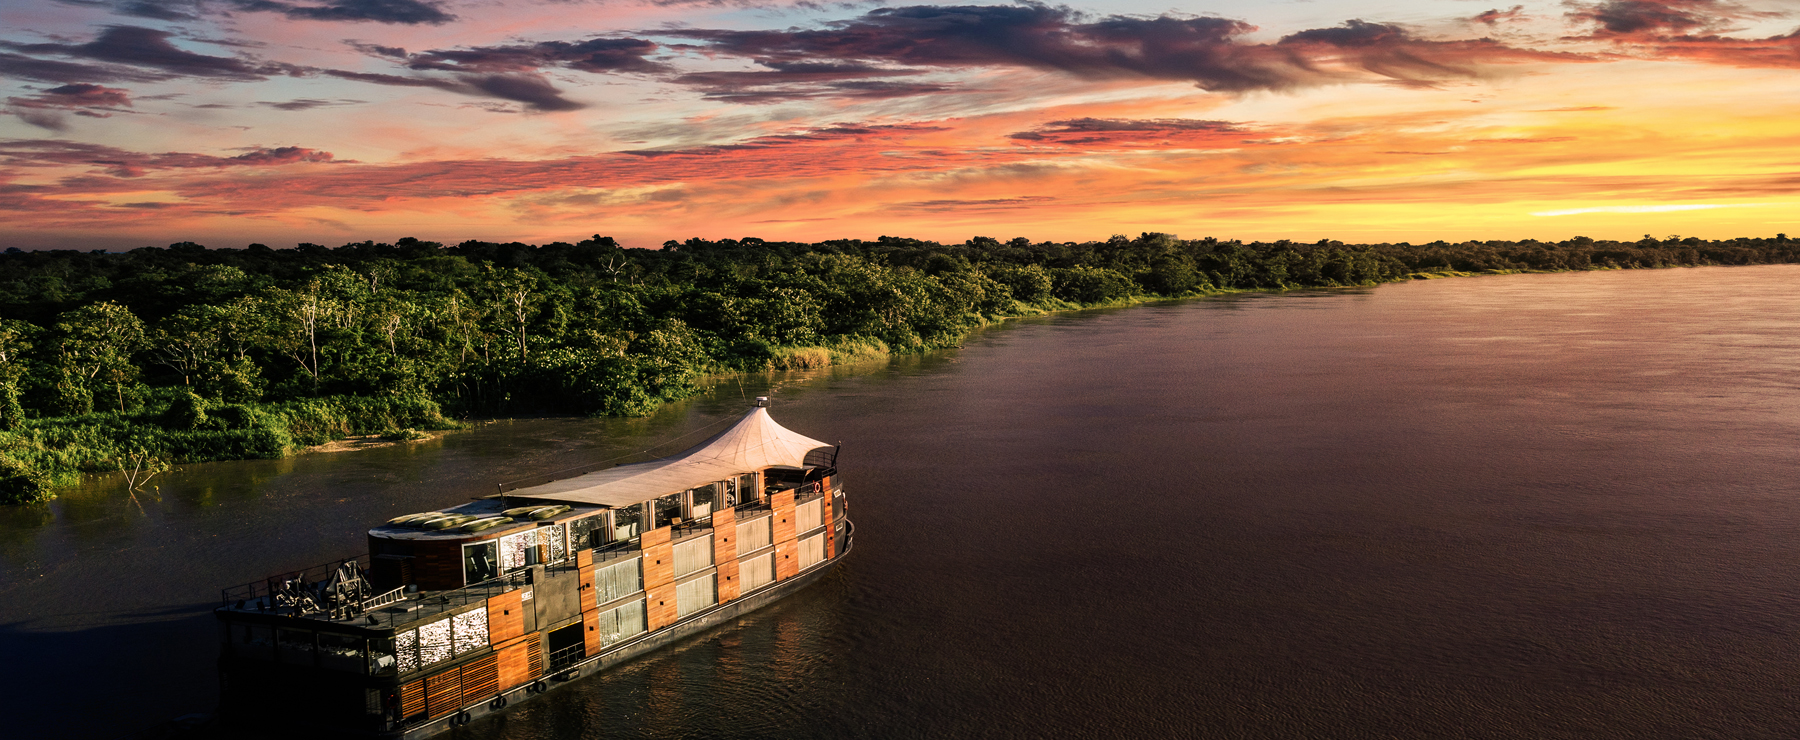 6 MV Aria facing Sunset with Aqua Expeditions- Amazon River - Atelier South America